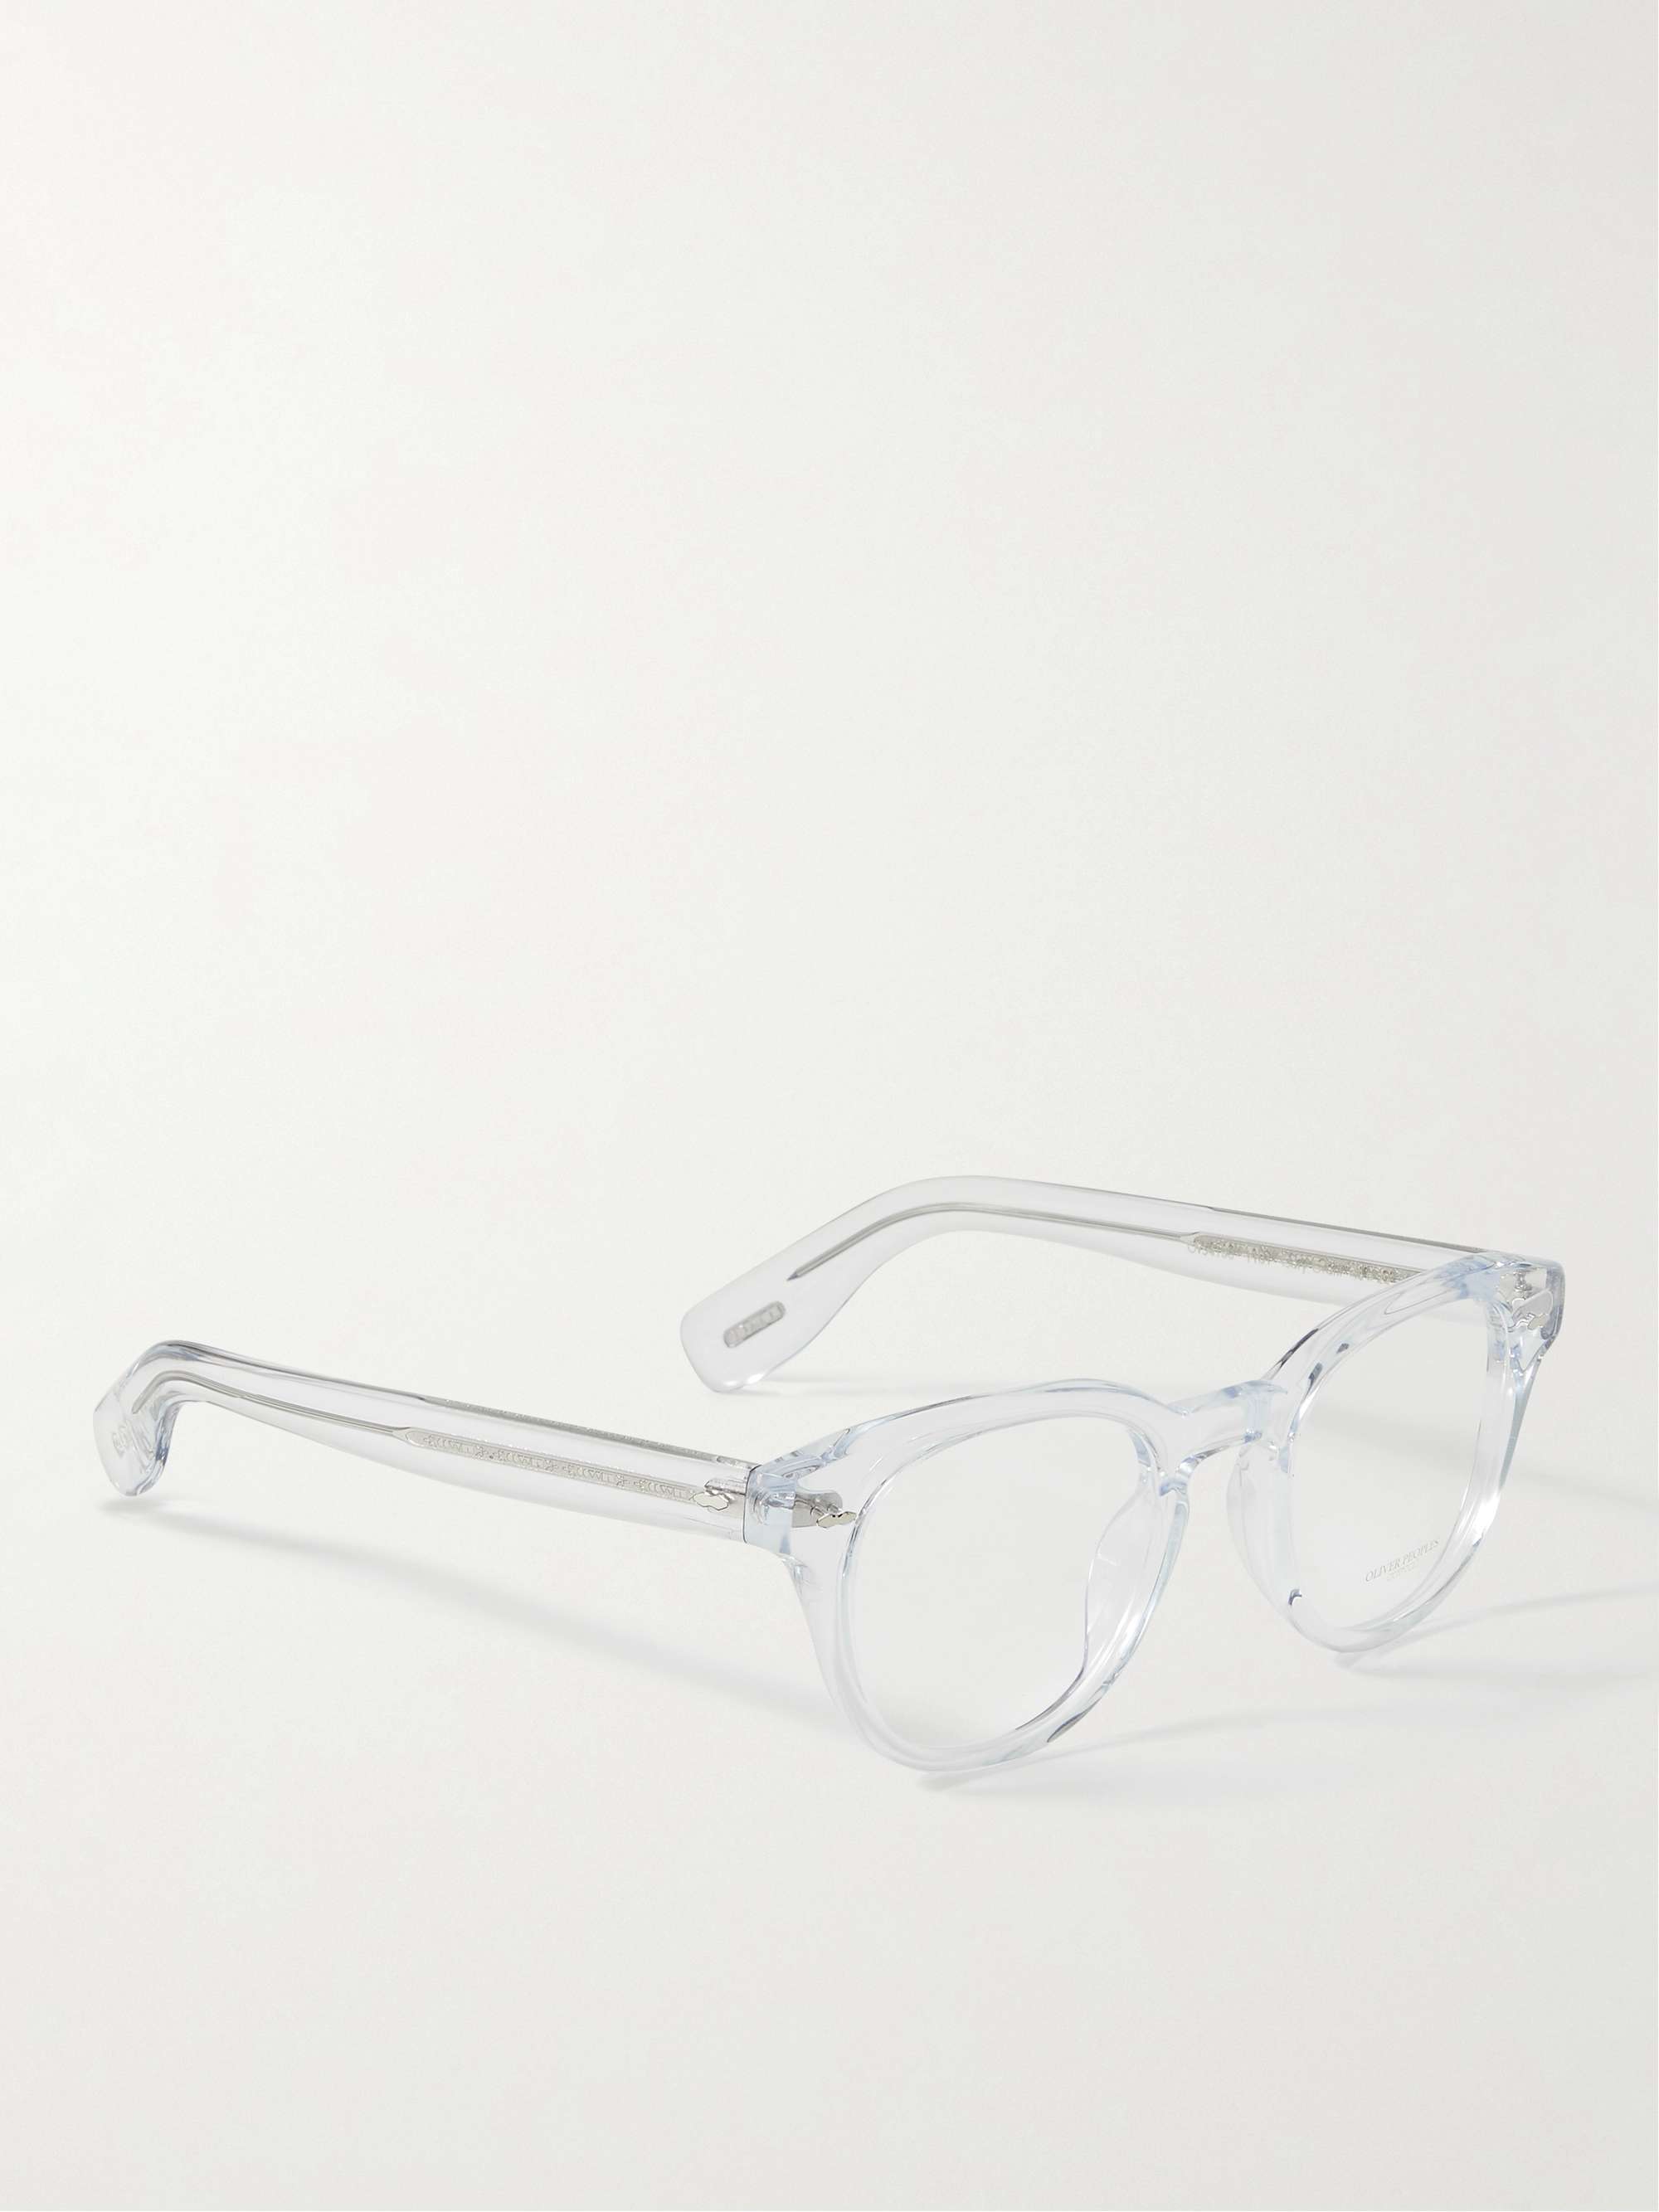 OLIVER PEOPLES + Cary Grant 48 Round-Frame Acetate Optical Lenses